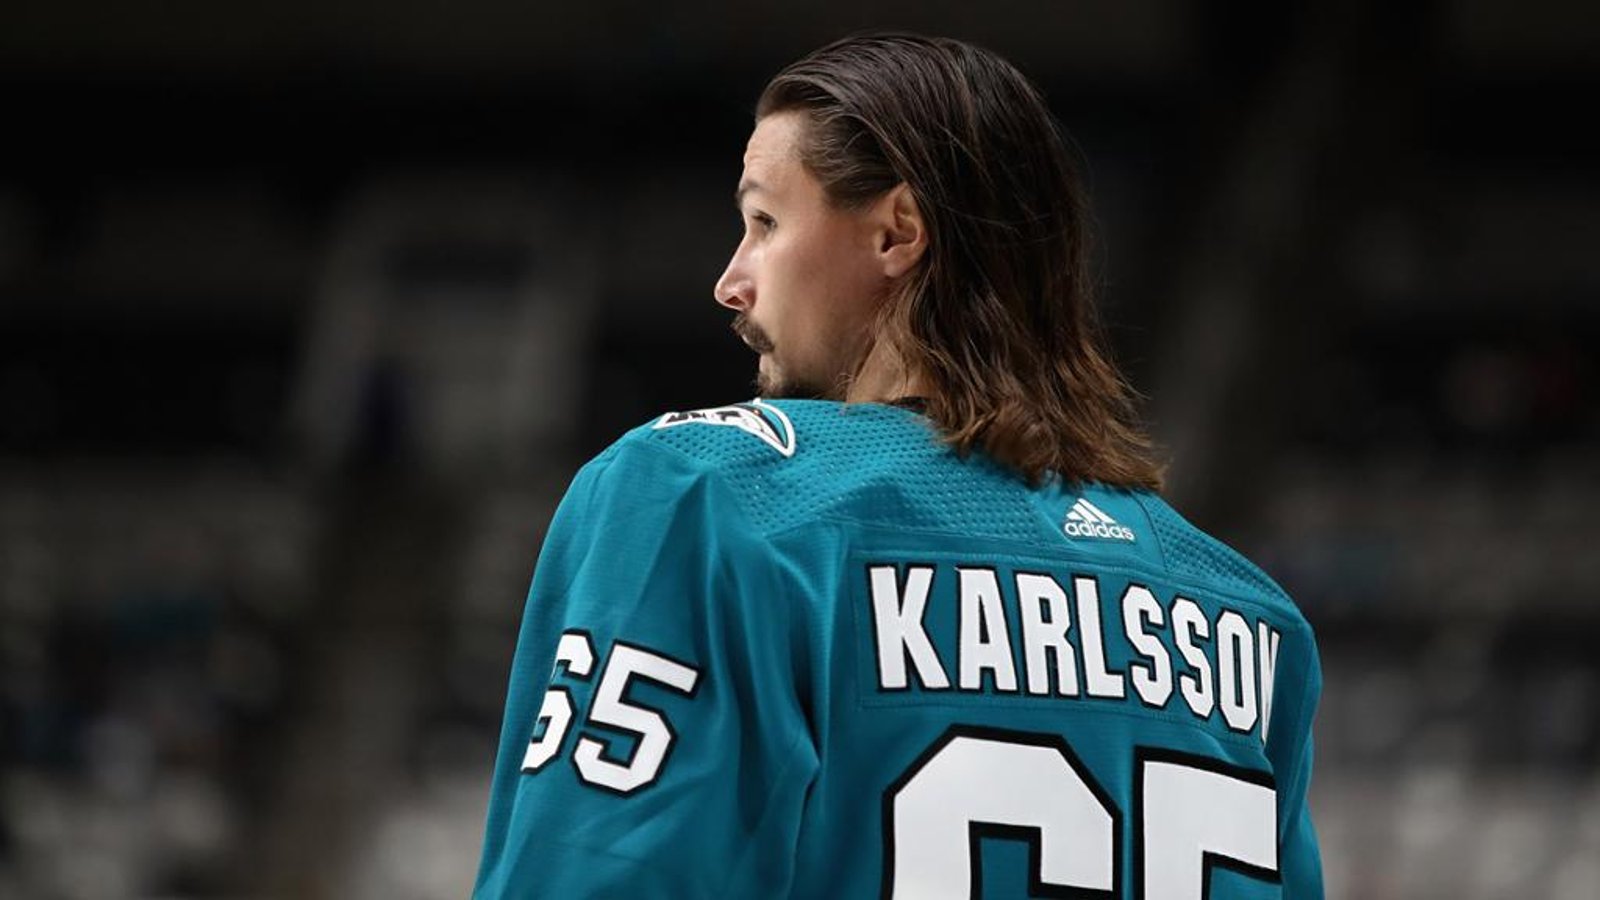 Karlsson to leave San Jose for New York?! 